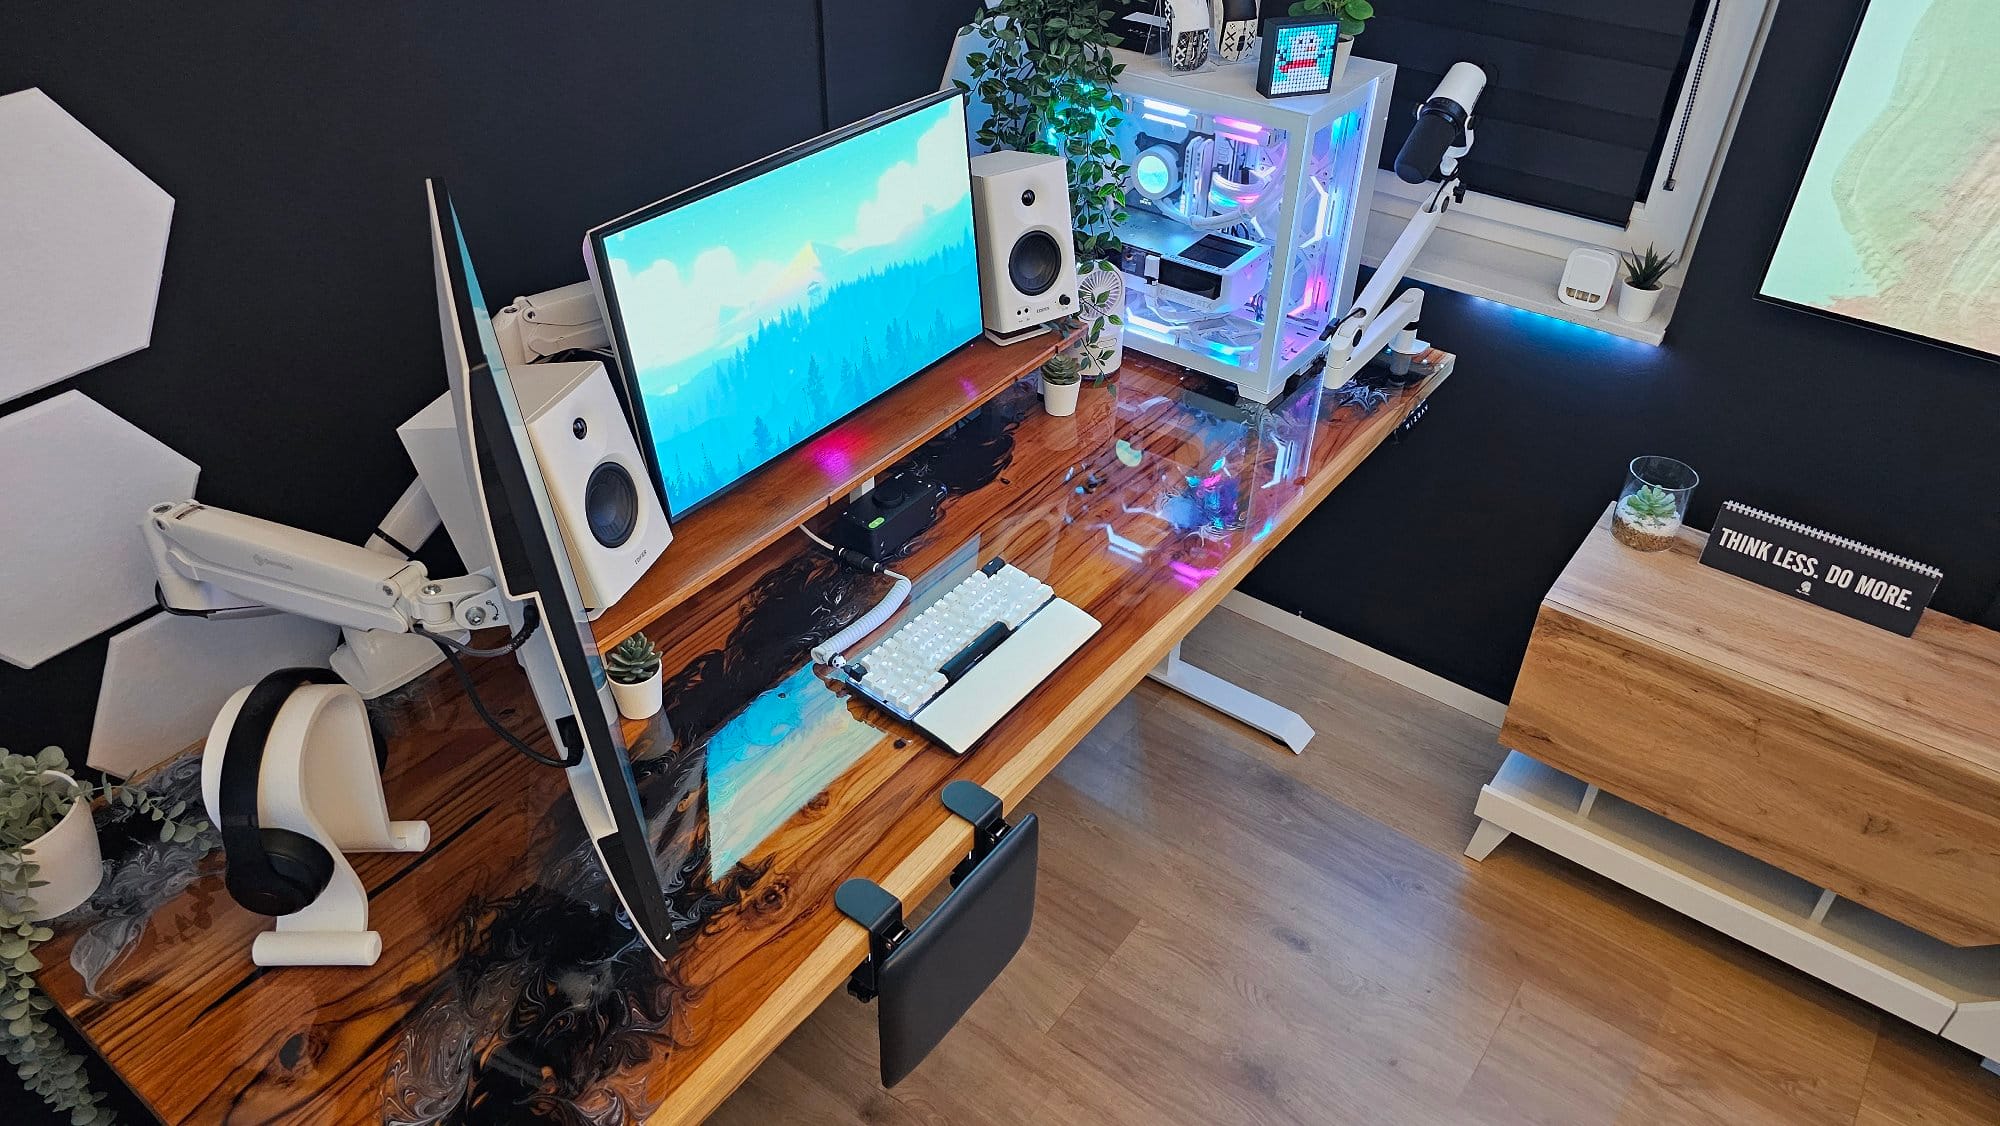 An elevated view of a gaming and work setup with a vibrant dual-monitor display, speaker system, and a high-end computer with RGB lighting, all on a polished wooden desk accented by modern accessories and a desk sign that reads “THINK LESS. DO MORE”